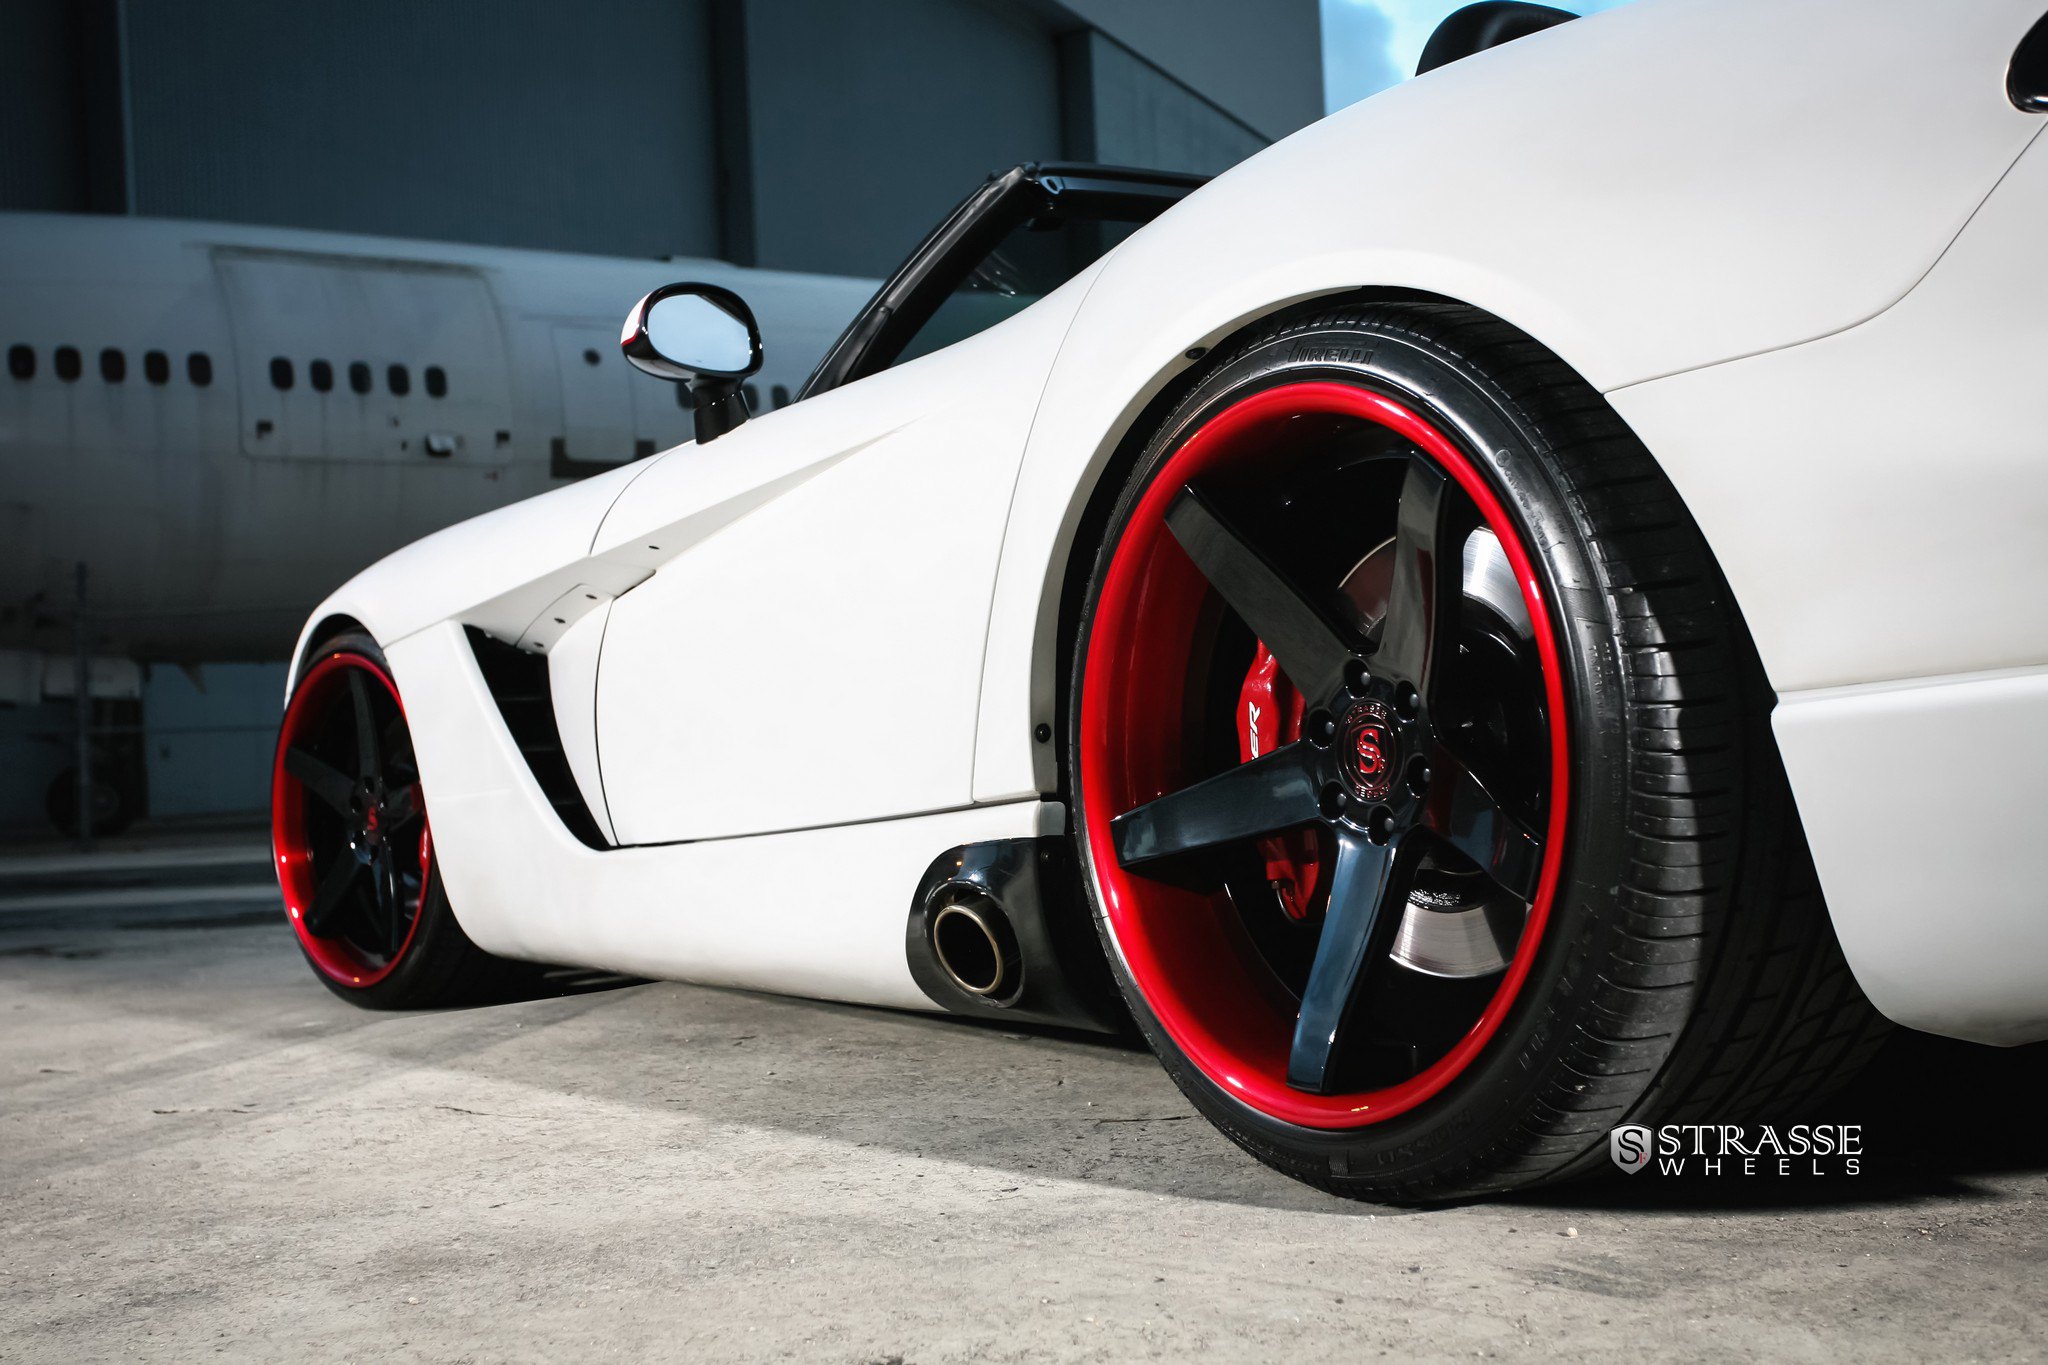 Gloss Black S5 Strasse Rims on White Dodge Viper - Photo by Strasse Forged